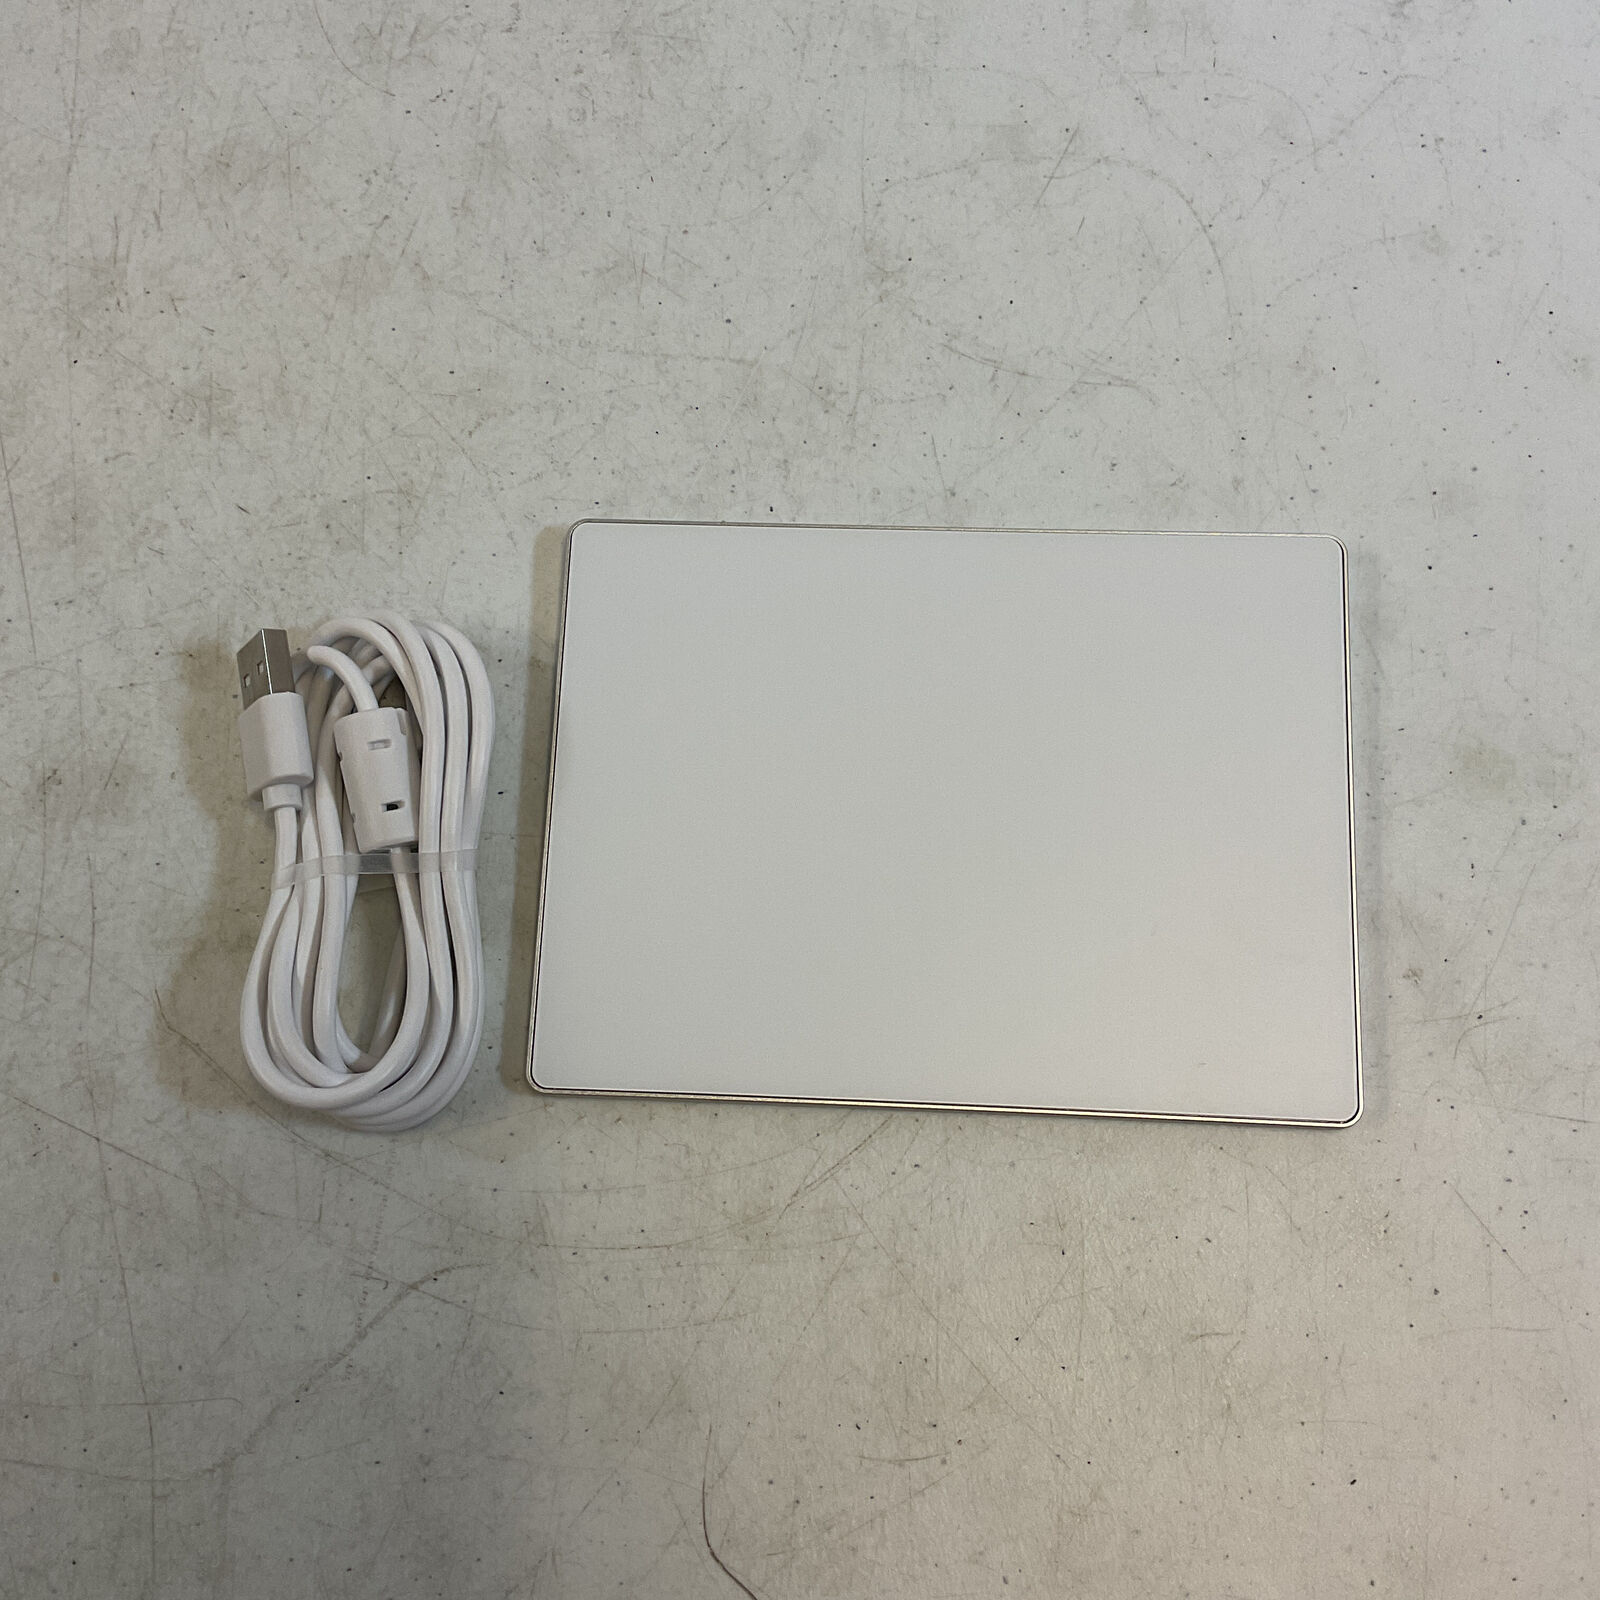 Seenda MOS400 White Silver Portable Ultra Slim Wired Trackpad With Manual